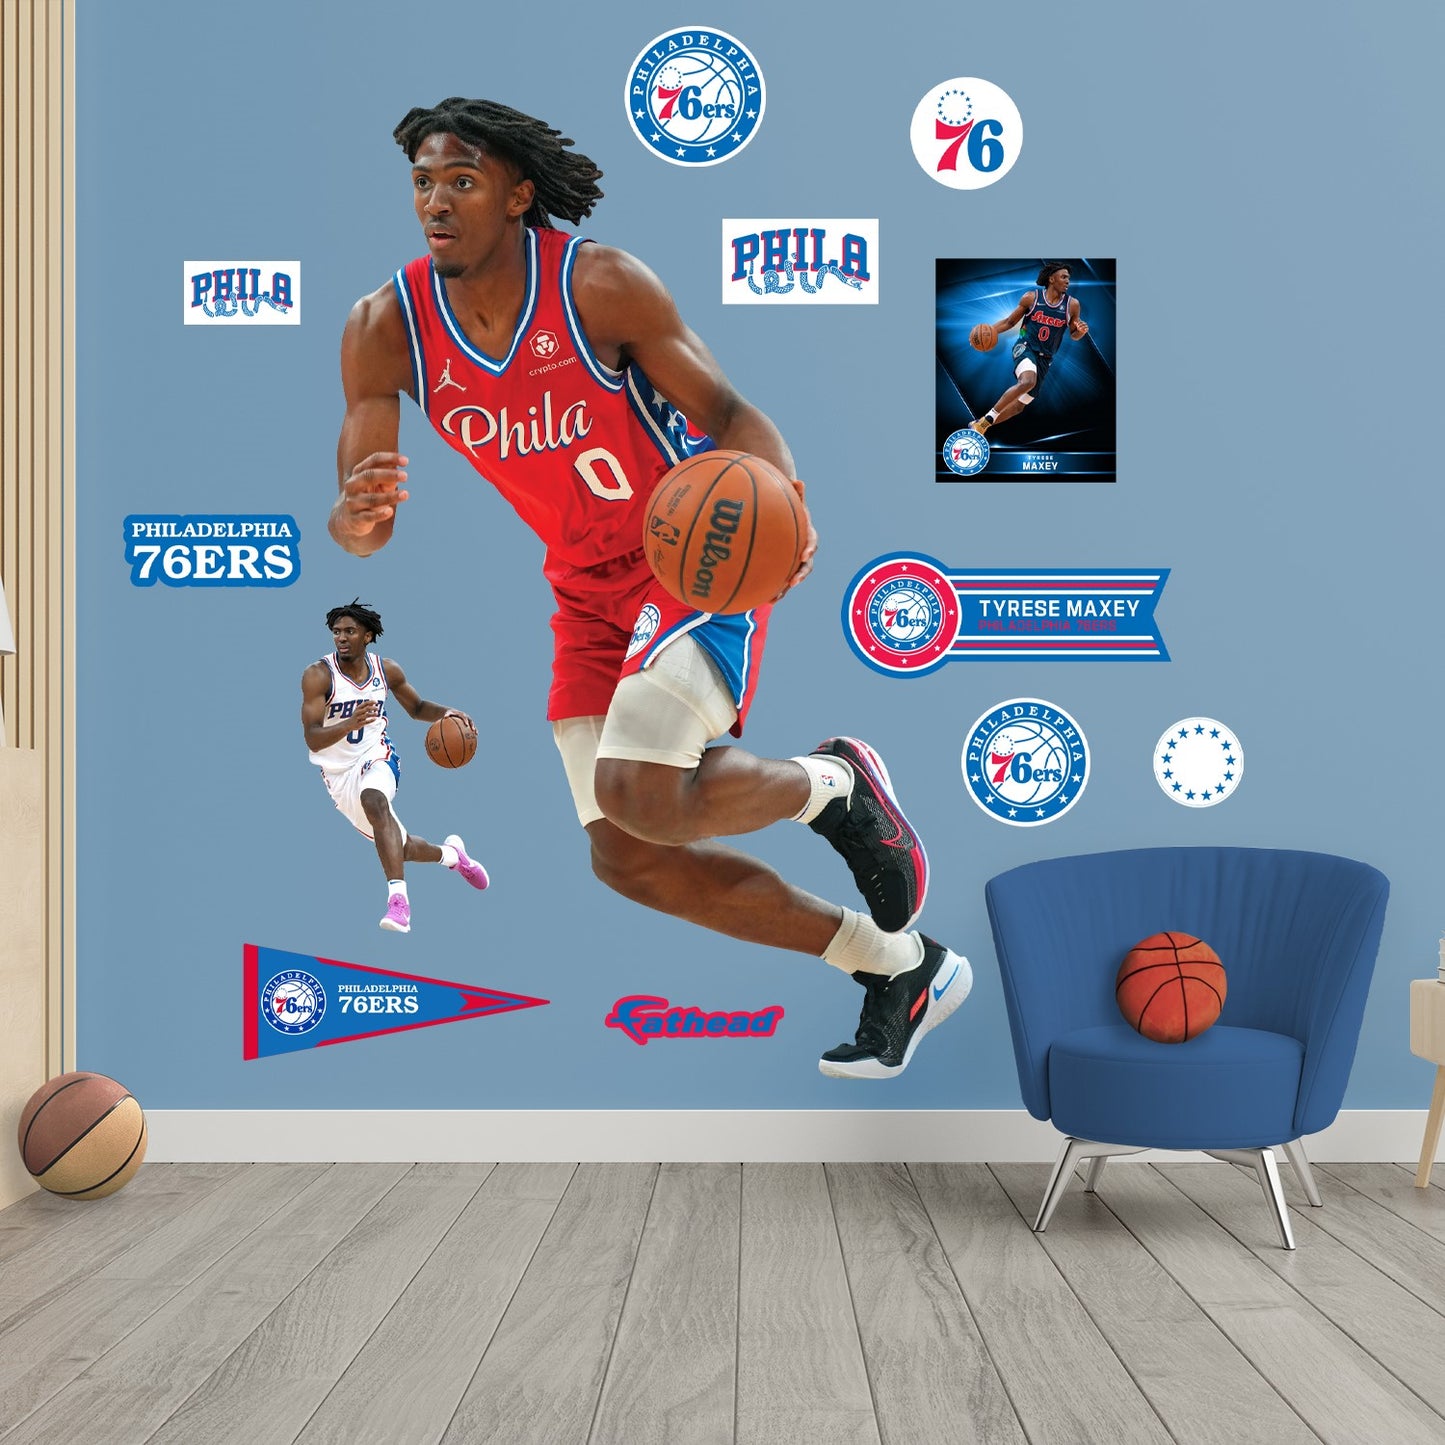 Philadelphia 76ers: Tyrese Maxey - Officially Licensed NBA Removable Adhesive Decal